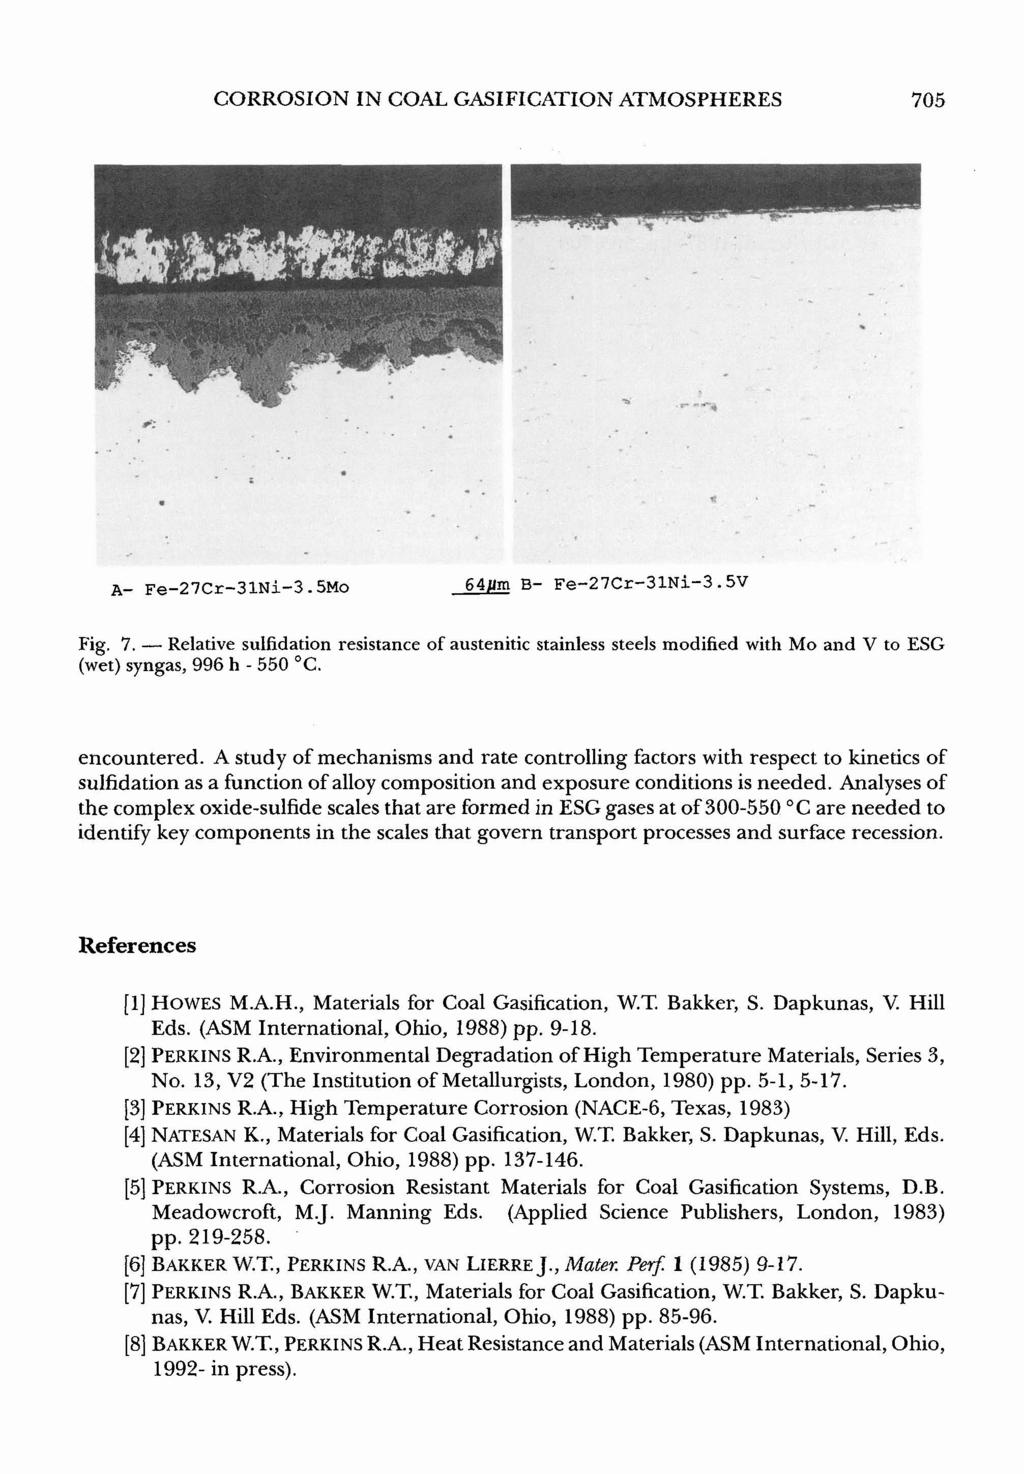 CORROSION IN COAL GASIFICATION ATMOSPHERES 705 Fig. 7. - Relative sulfidation resistance of austenitic stainless steels modified with Mo and V to ESG (wet) syngas, 996 h - 550 O C. encountered.